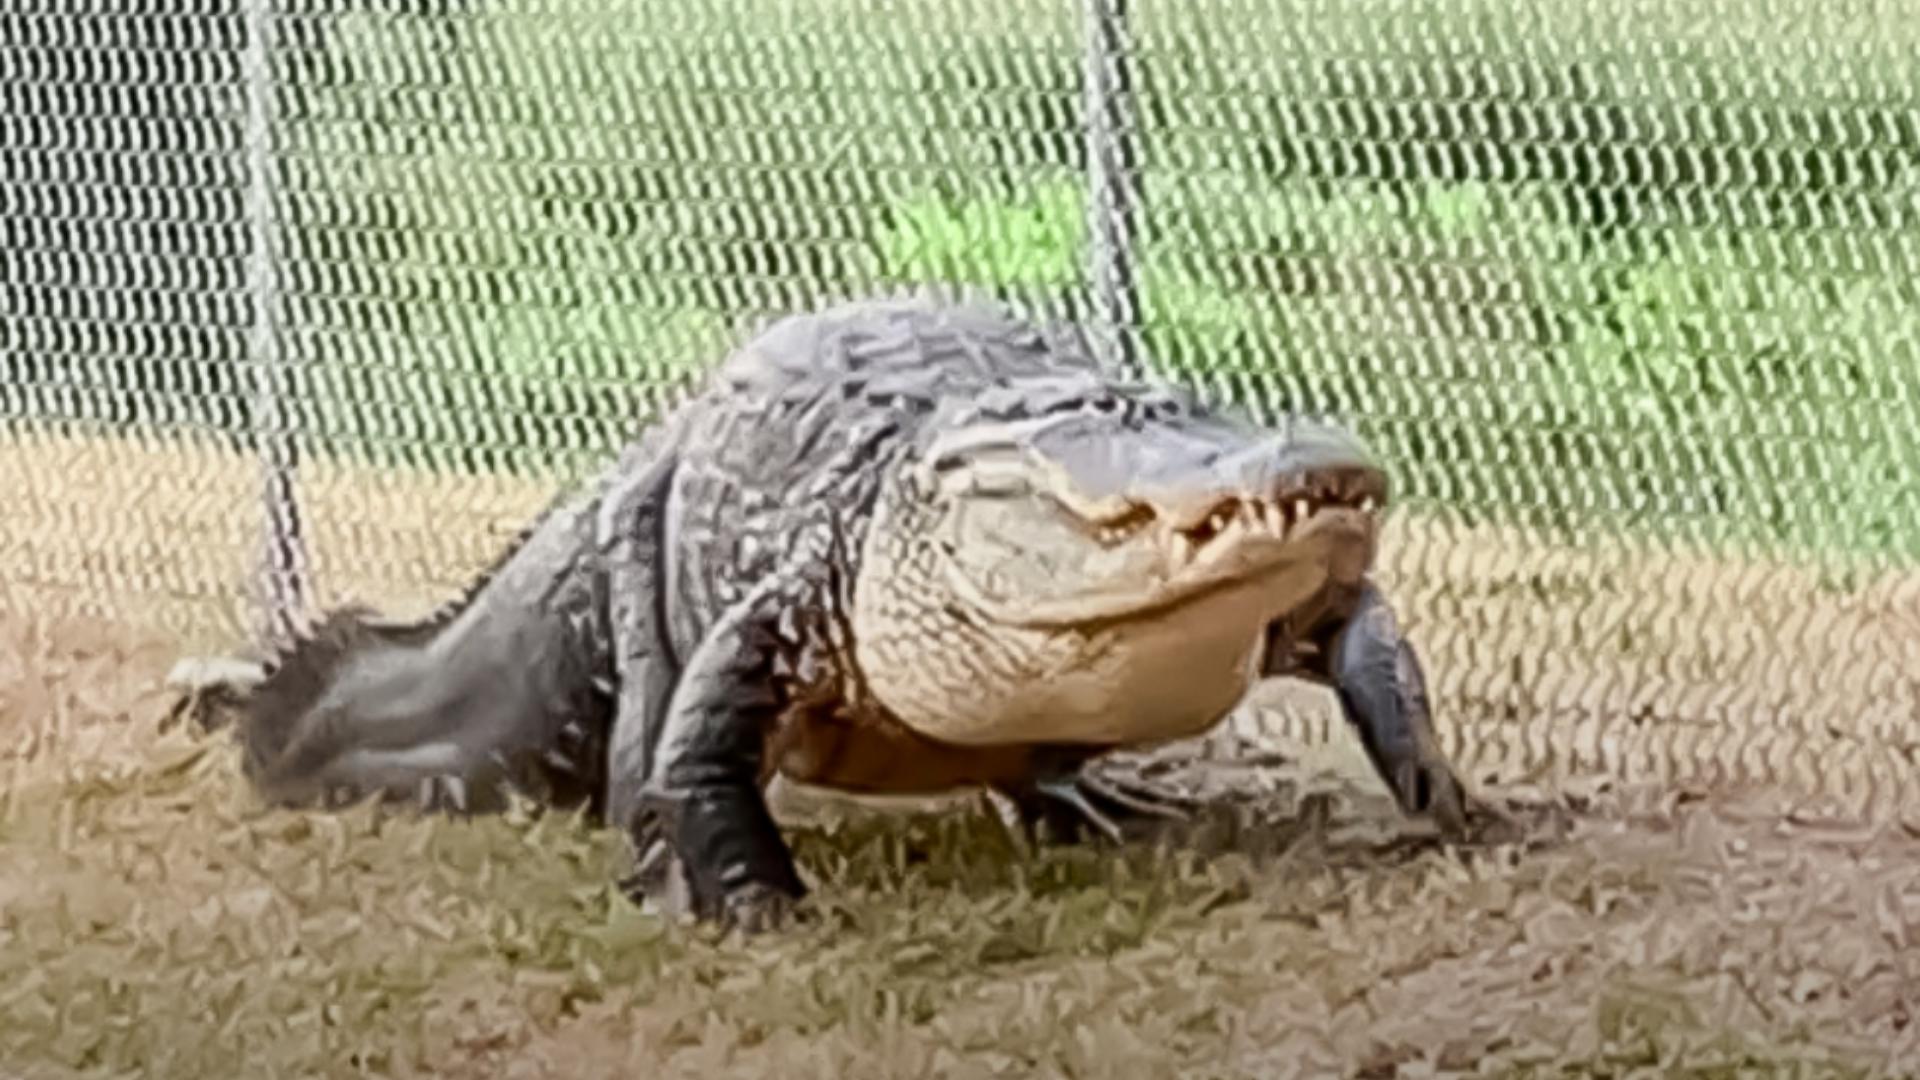 The 12.5-foot gator was promptly captured and safely relocated with help from the FWC.